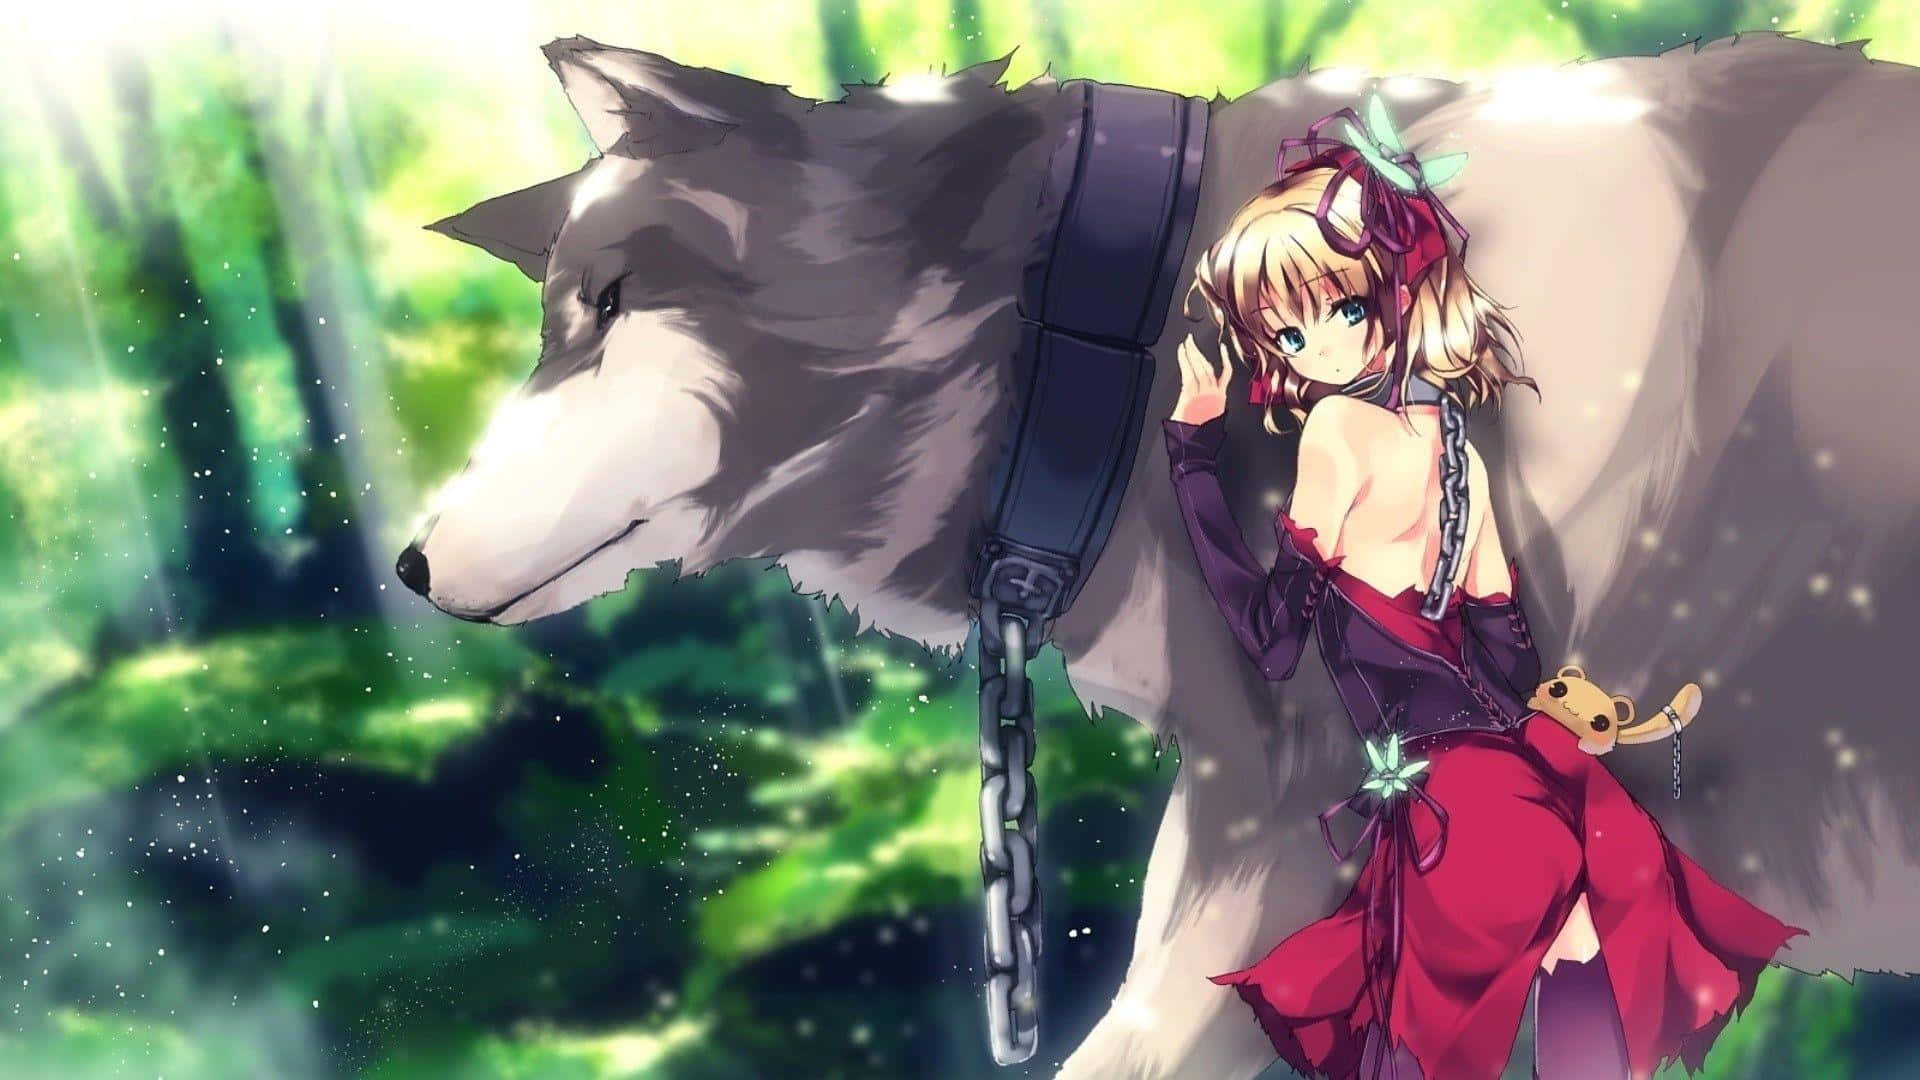 A Cute Anime Wolf Girl Perched among the Trees, Ready to Pounce Wallpaper